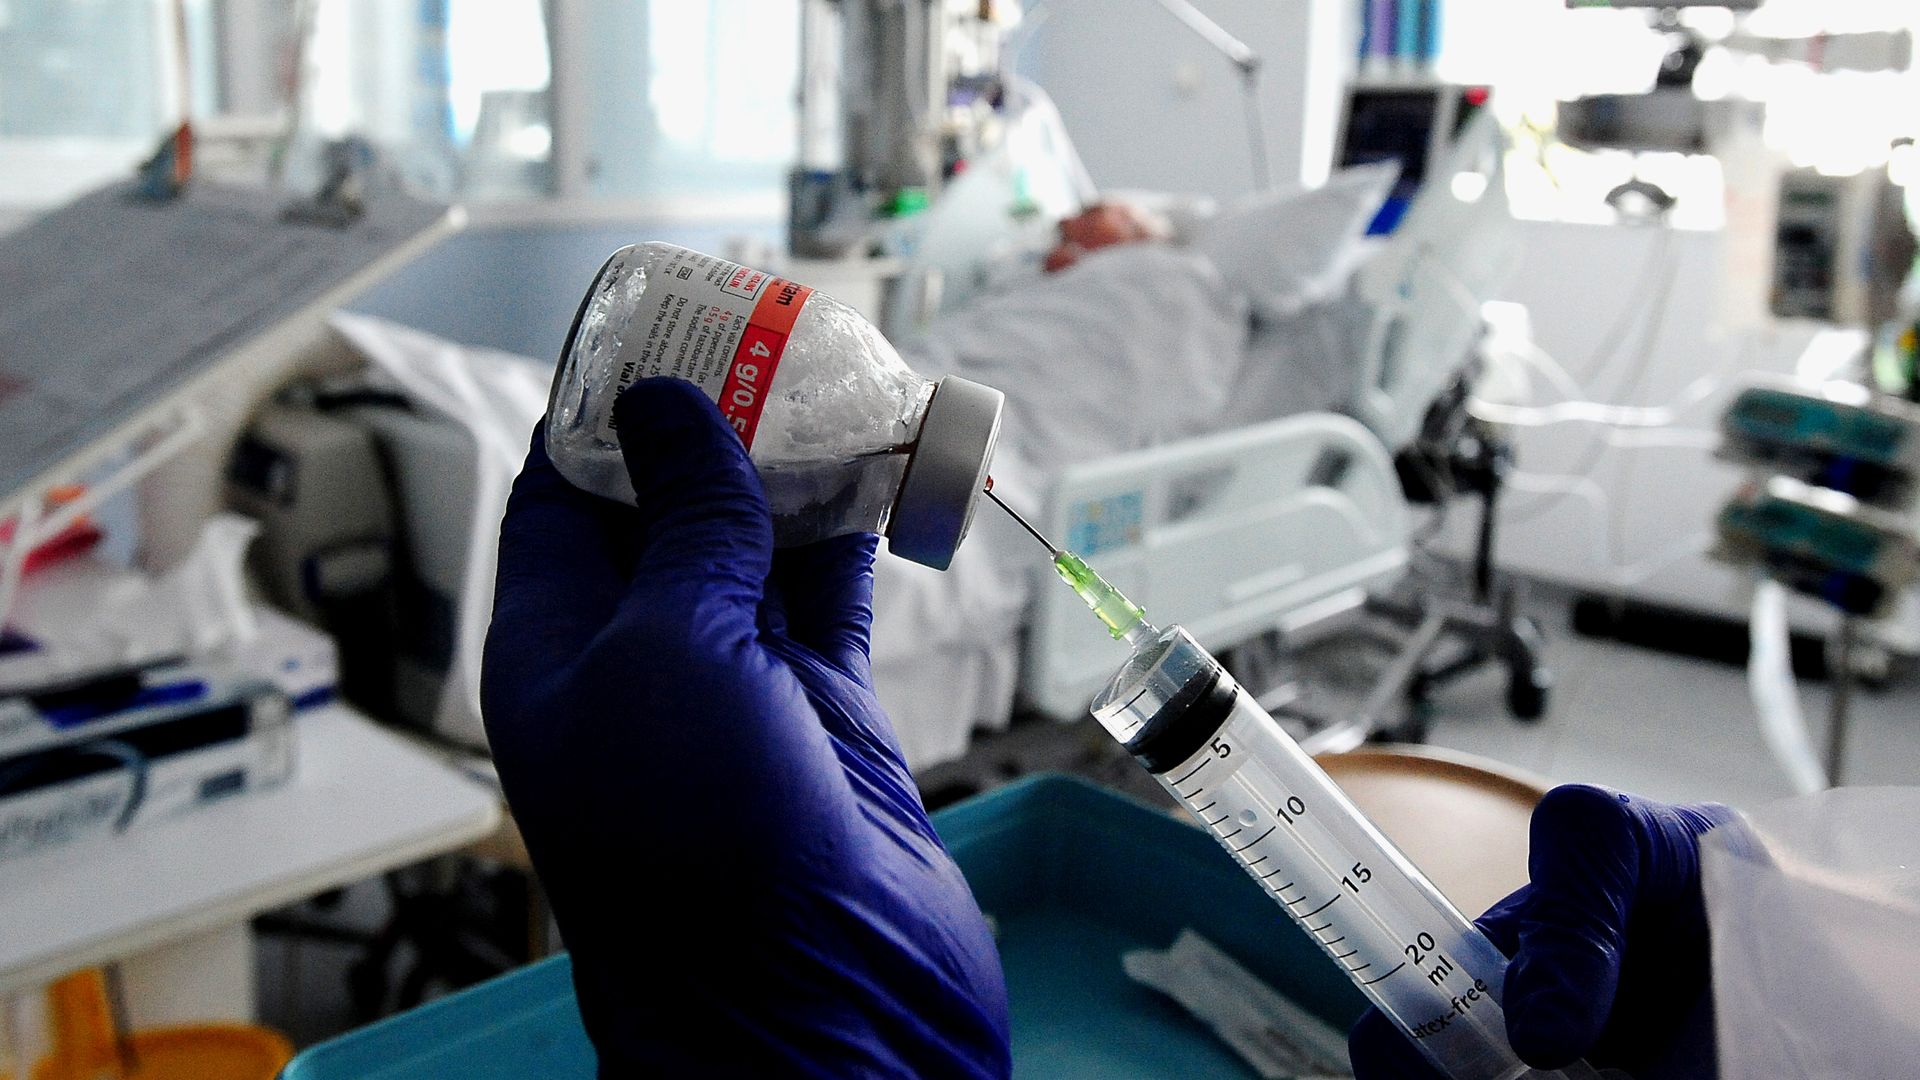 A generic drug being administered in a hospital.